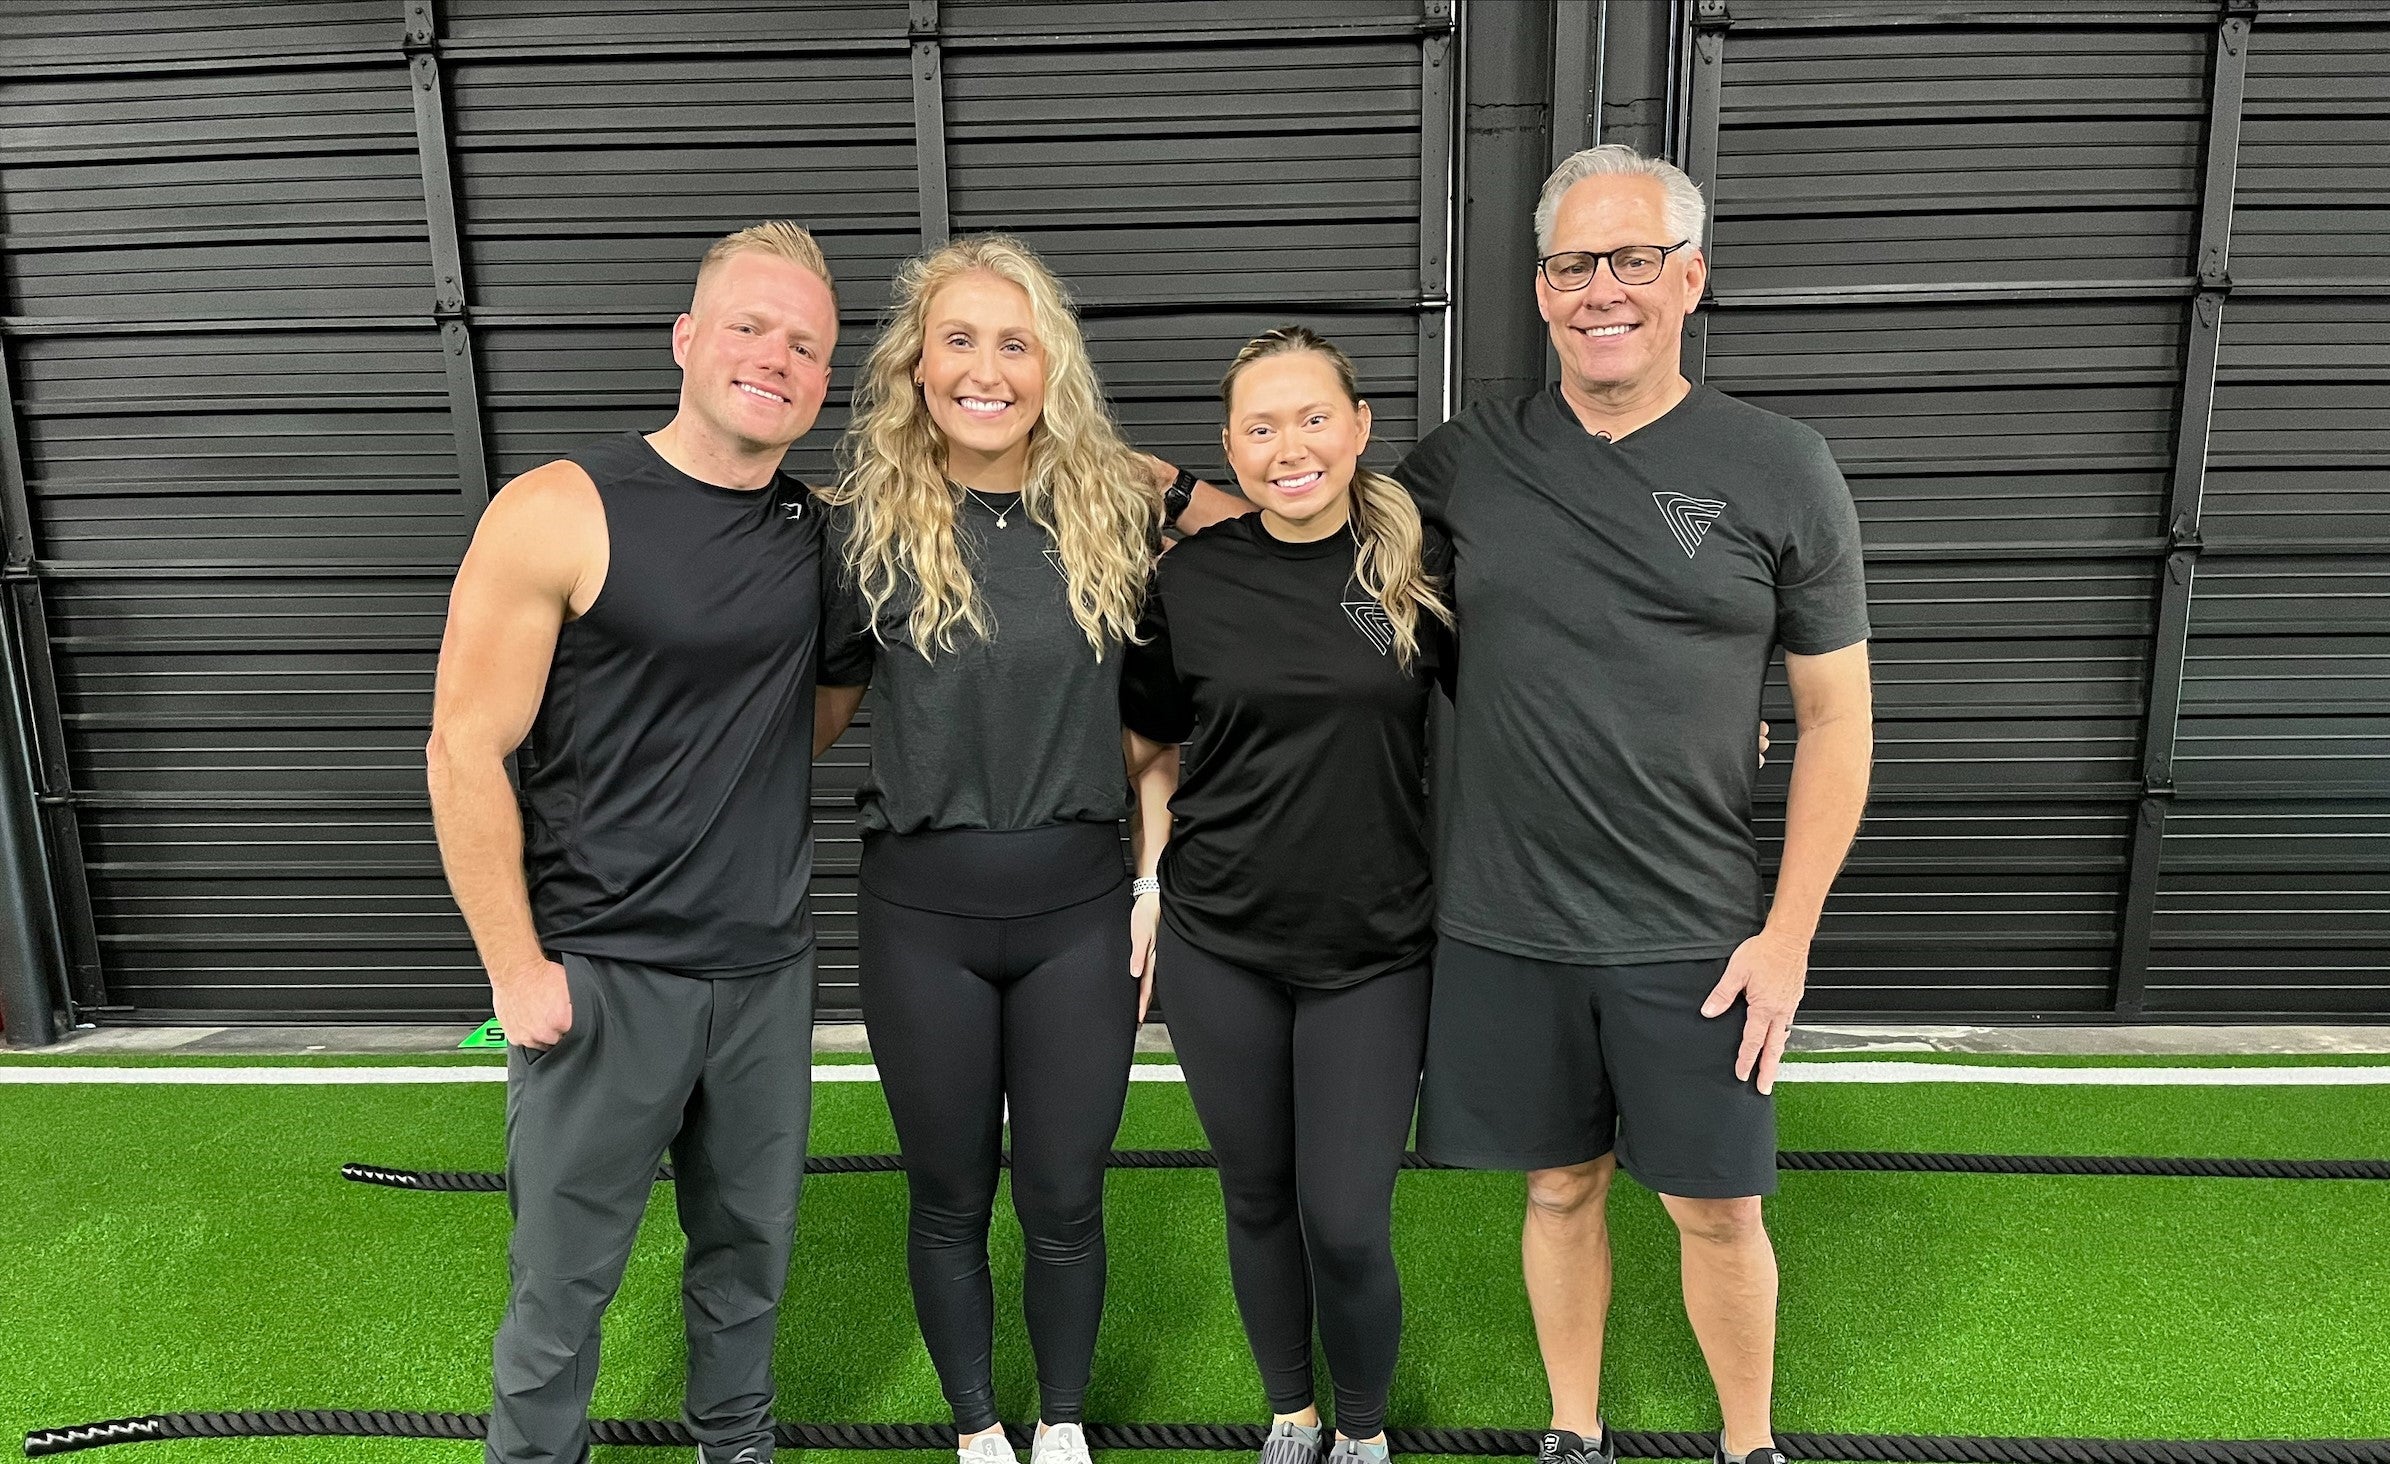 Dr. Frank Gaffney fuses family, fitness with functional exercise routines